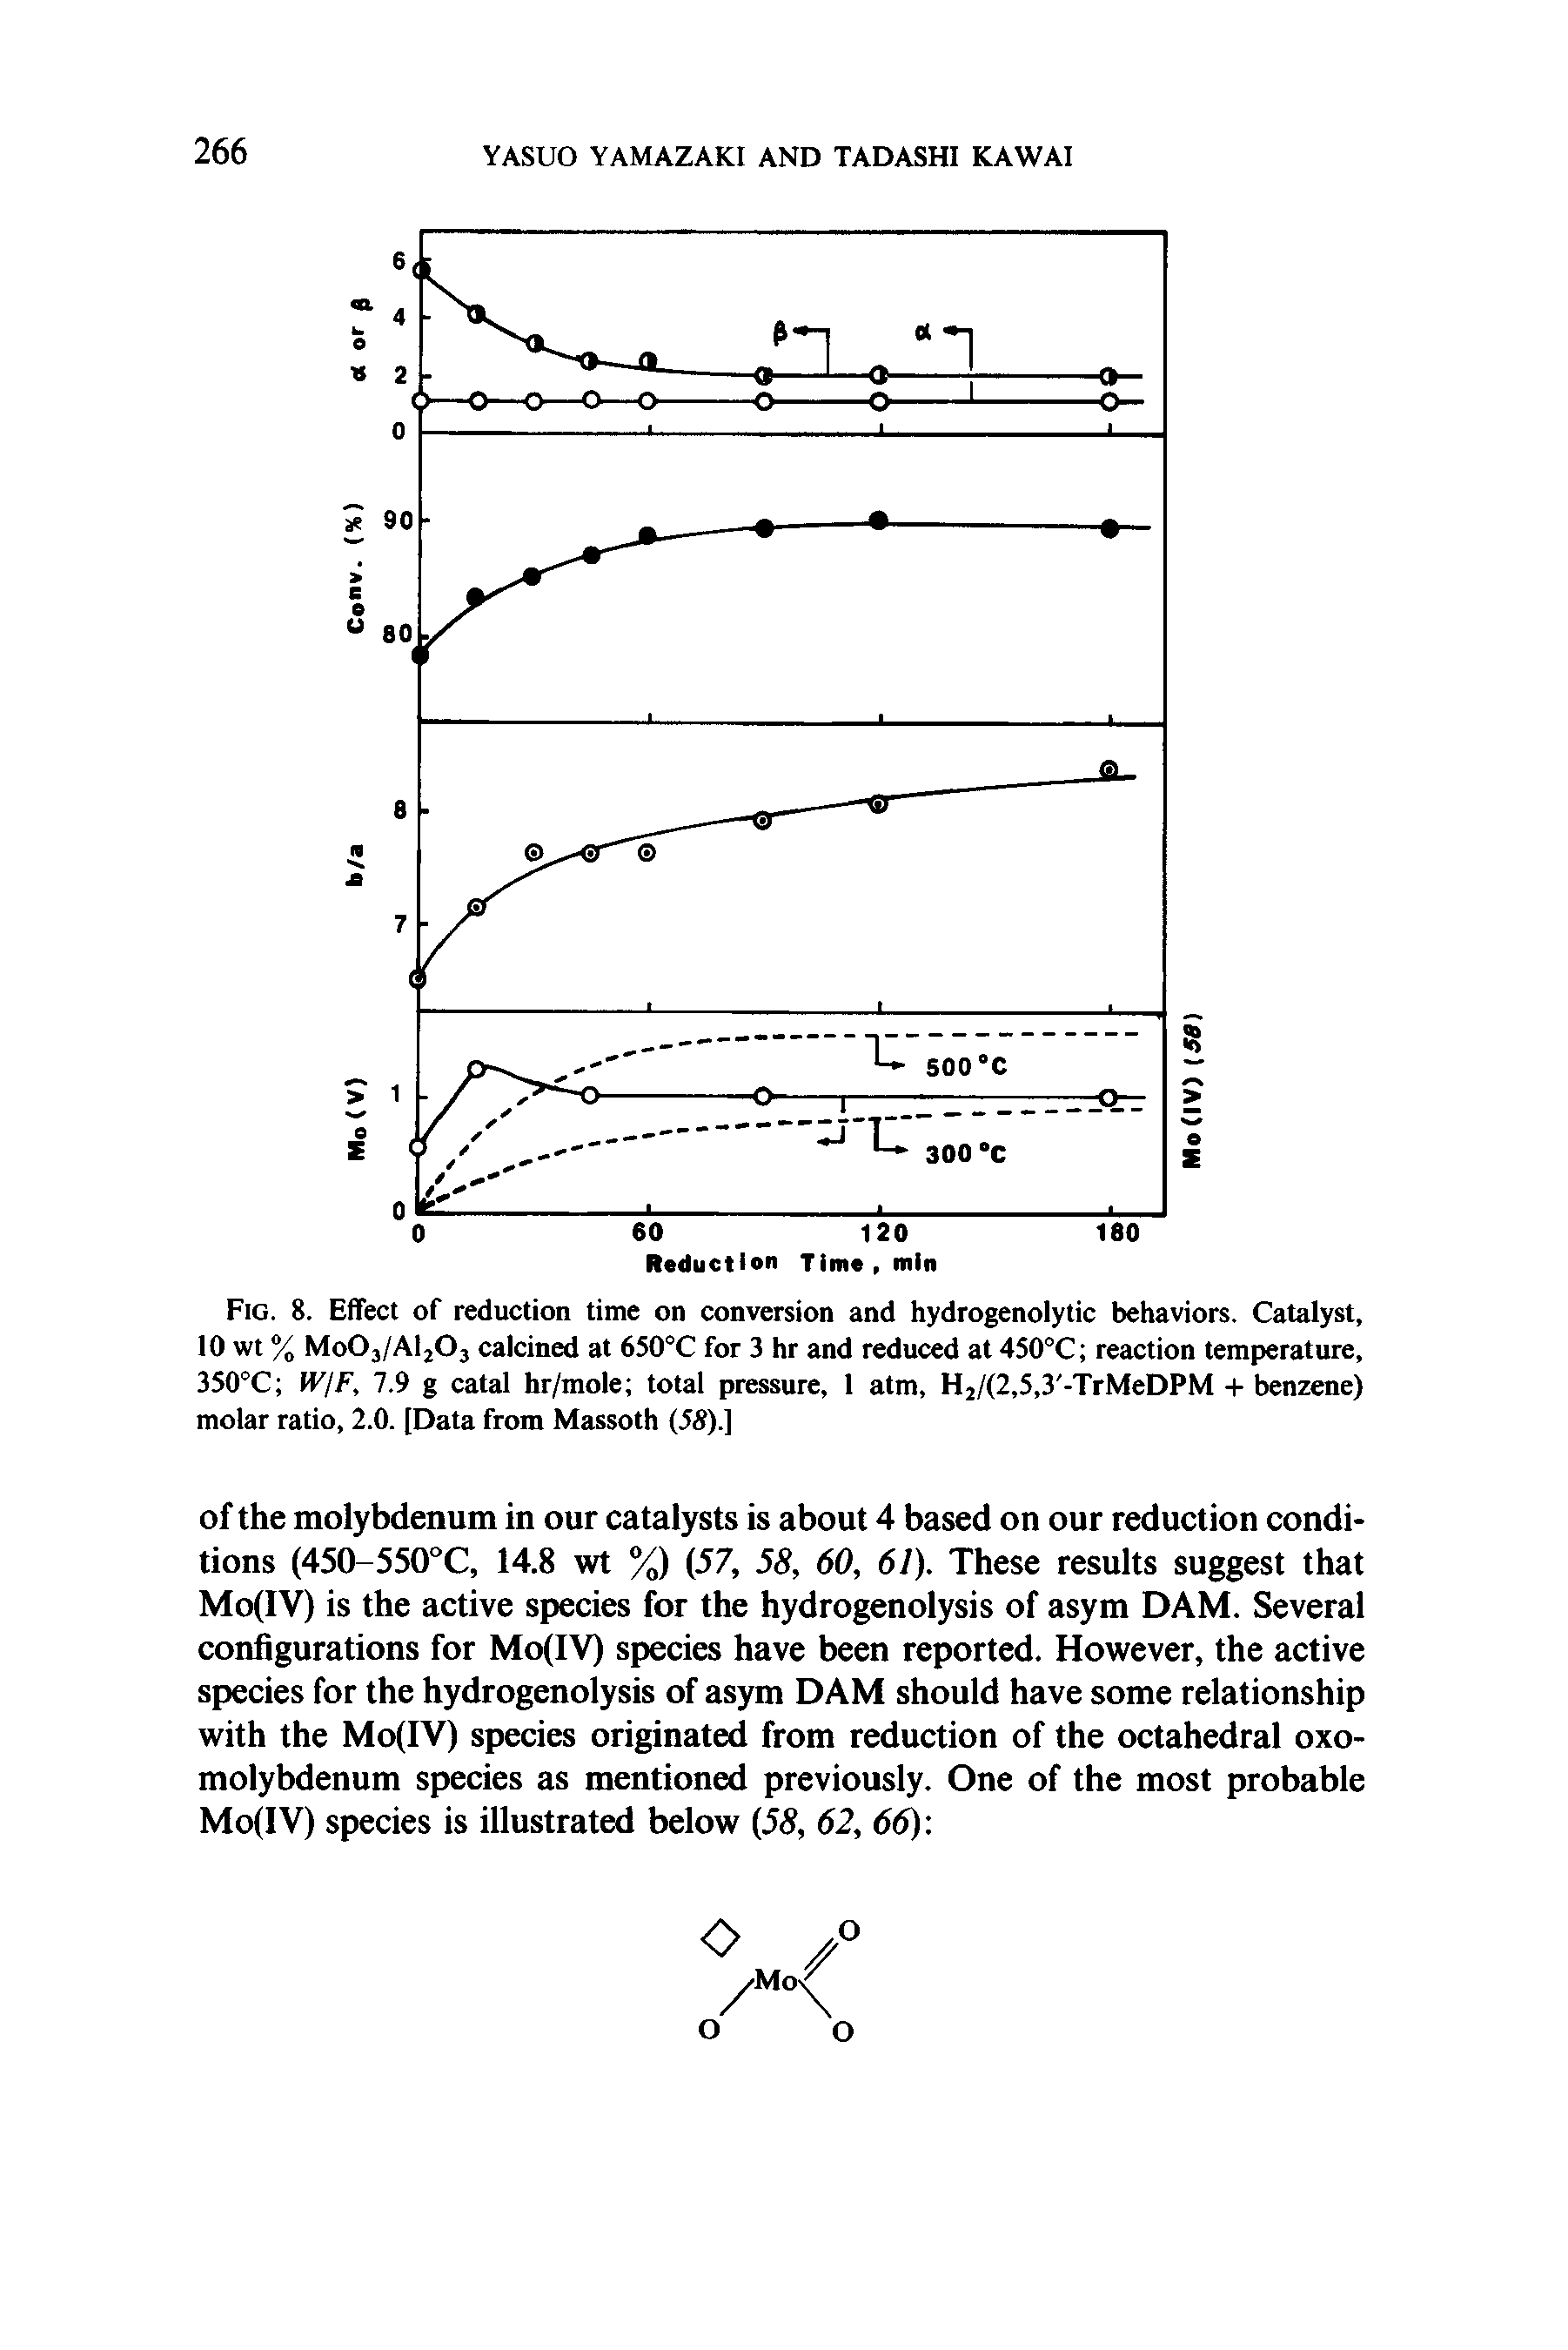 Fig. 8. Effect of reduction time on conversion and hydrogenolytic behaviors. Catalyst, 10 wt % M0O3/AI2O3 calcined at 650°C for 3 hr and reduced at 450°C reaction temperature, 350°C WjF, 7.9 g catal hr/mole total pressure, 1 atm, H2/(2,5,3 -TrMeDPM + benzene) molar ratio, 2.0. [Data from Massoth (5S).]...